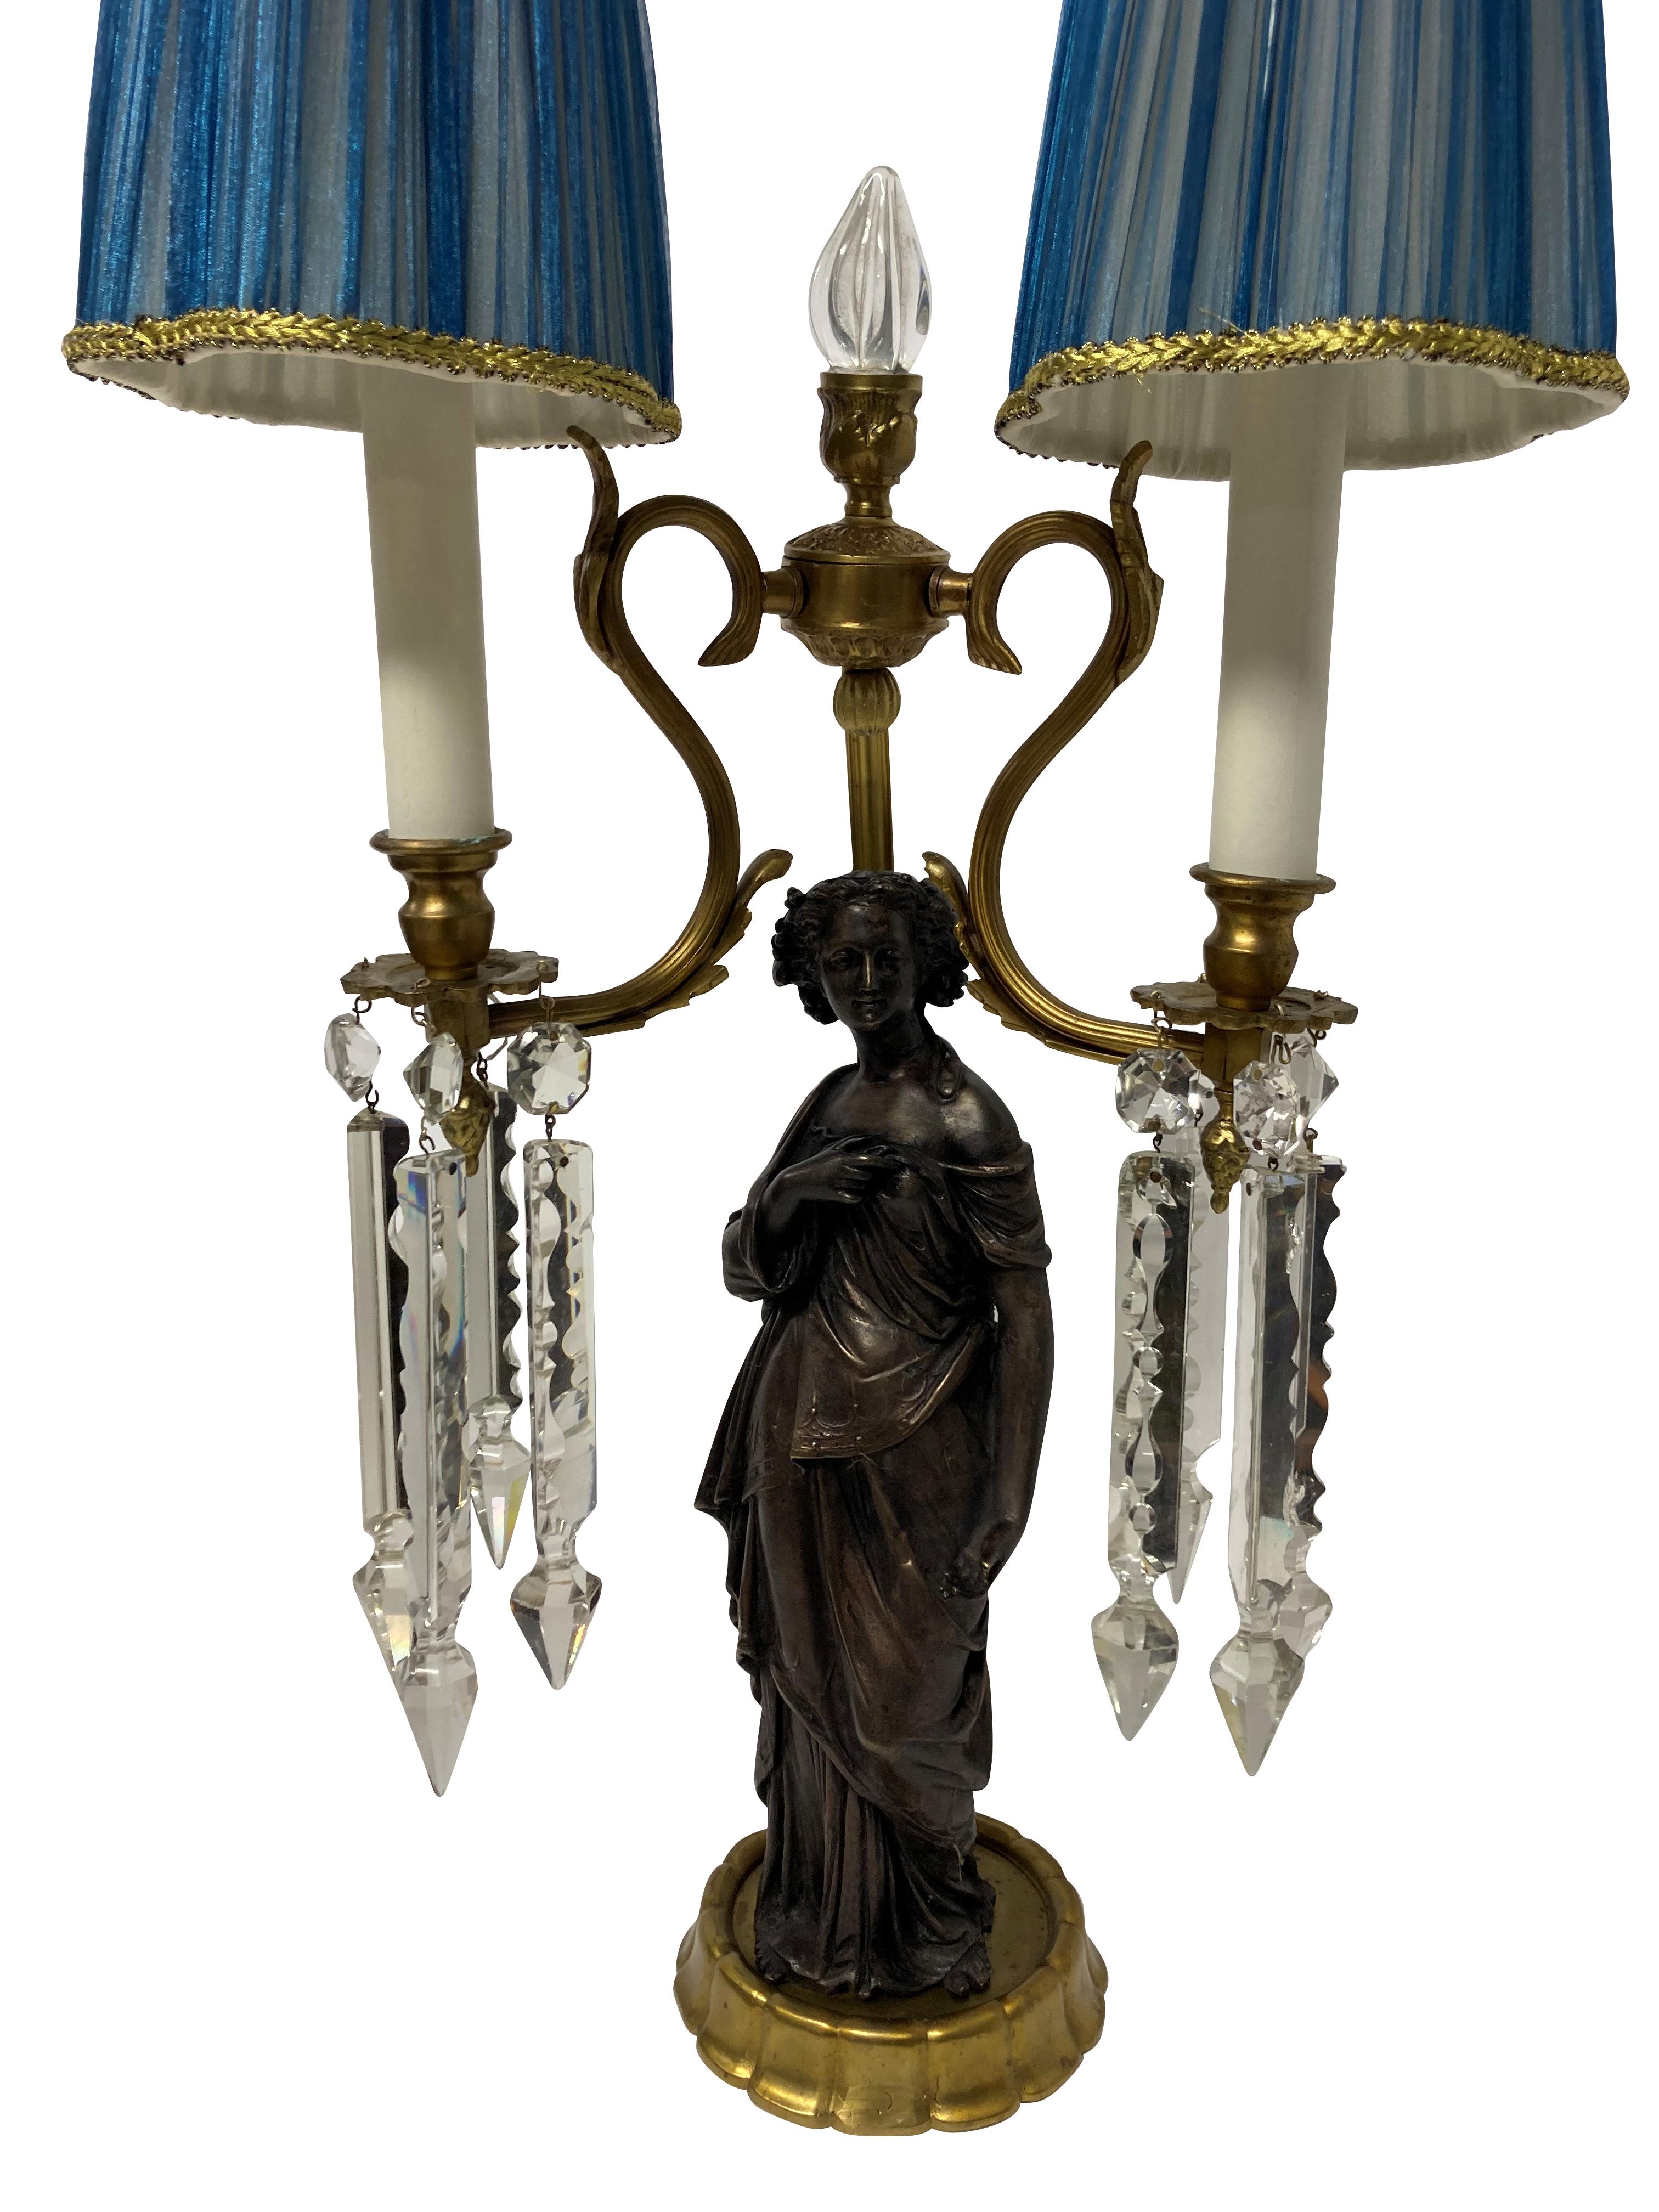 Neoclassical Pair of Midcentury Classical Figural Lamps